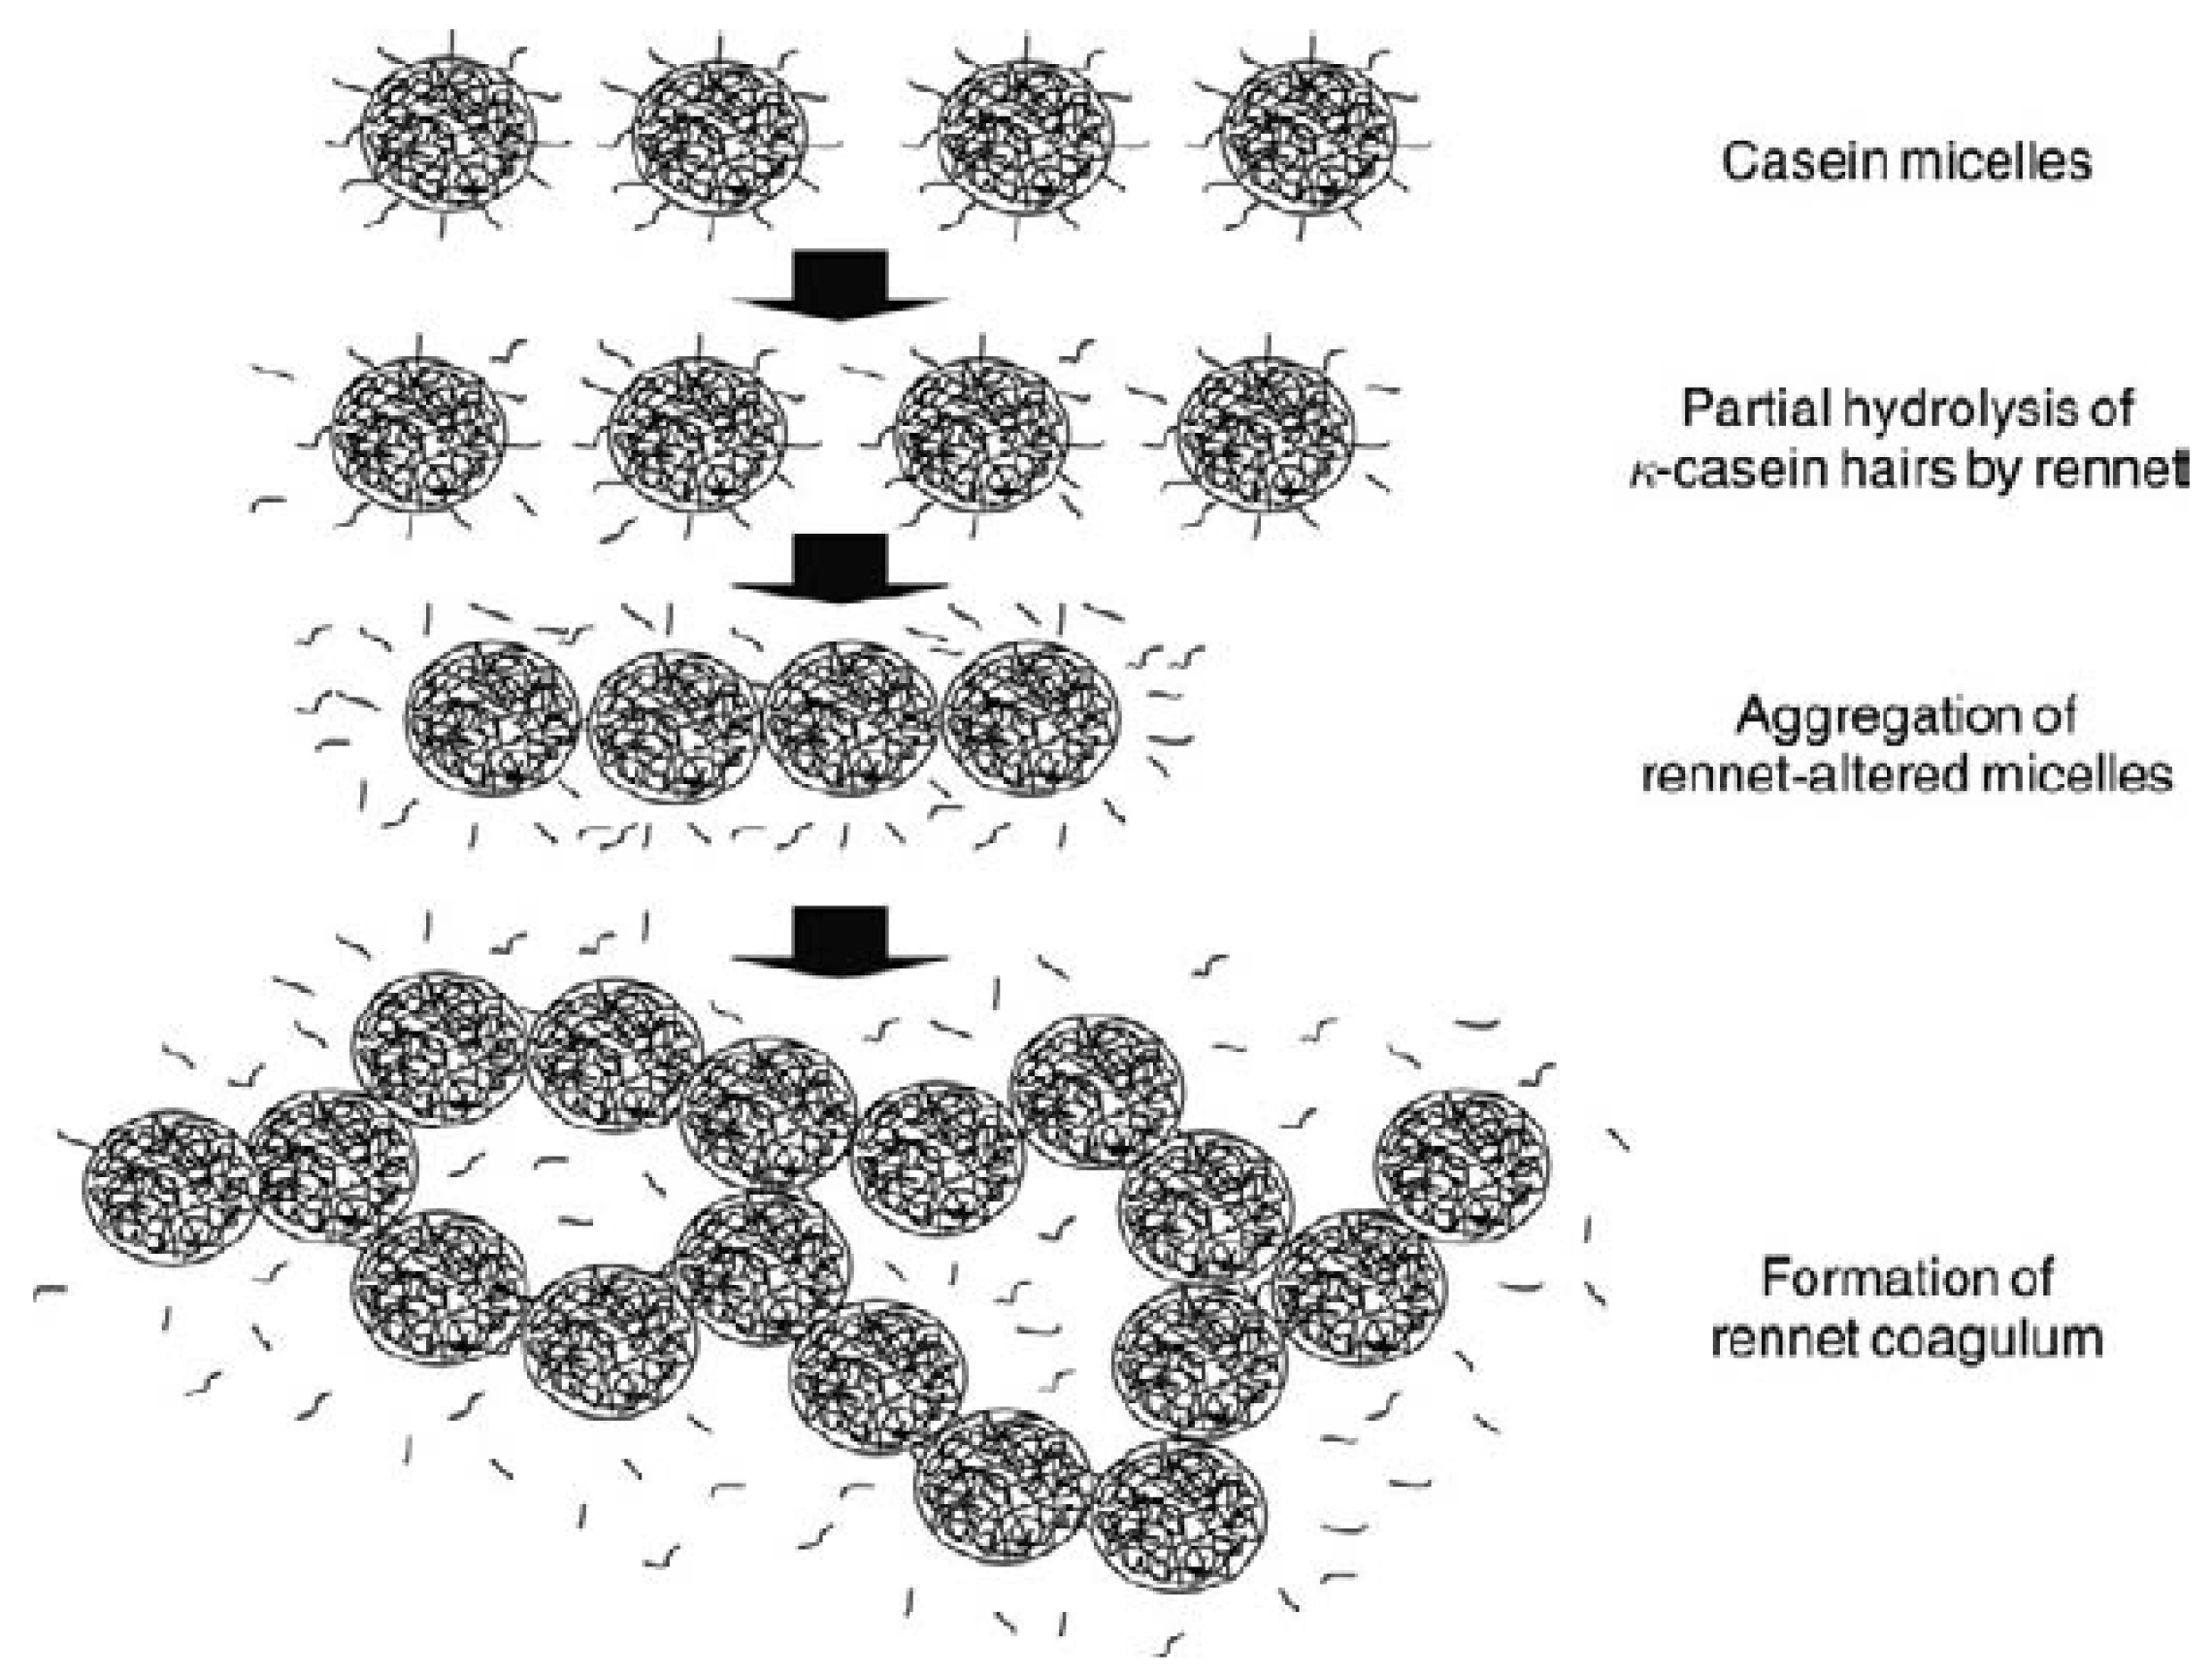 Foods | Free Full-Text | Rennet-Induced Casein Micelle Aggregation Models:  A Review